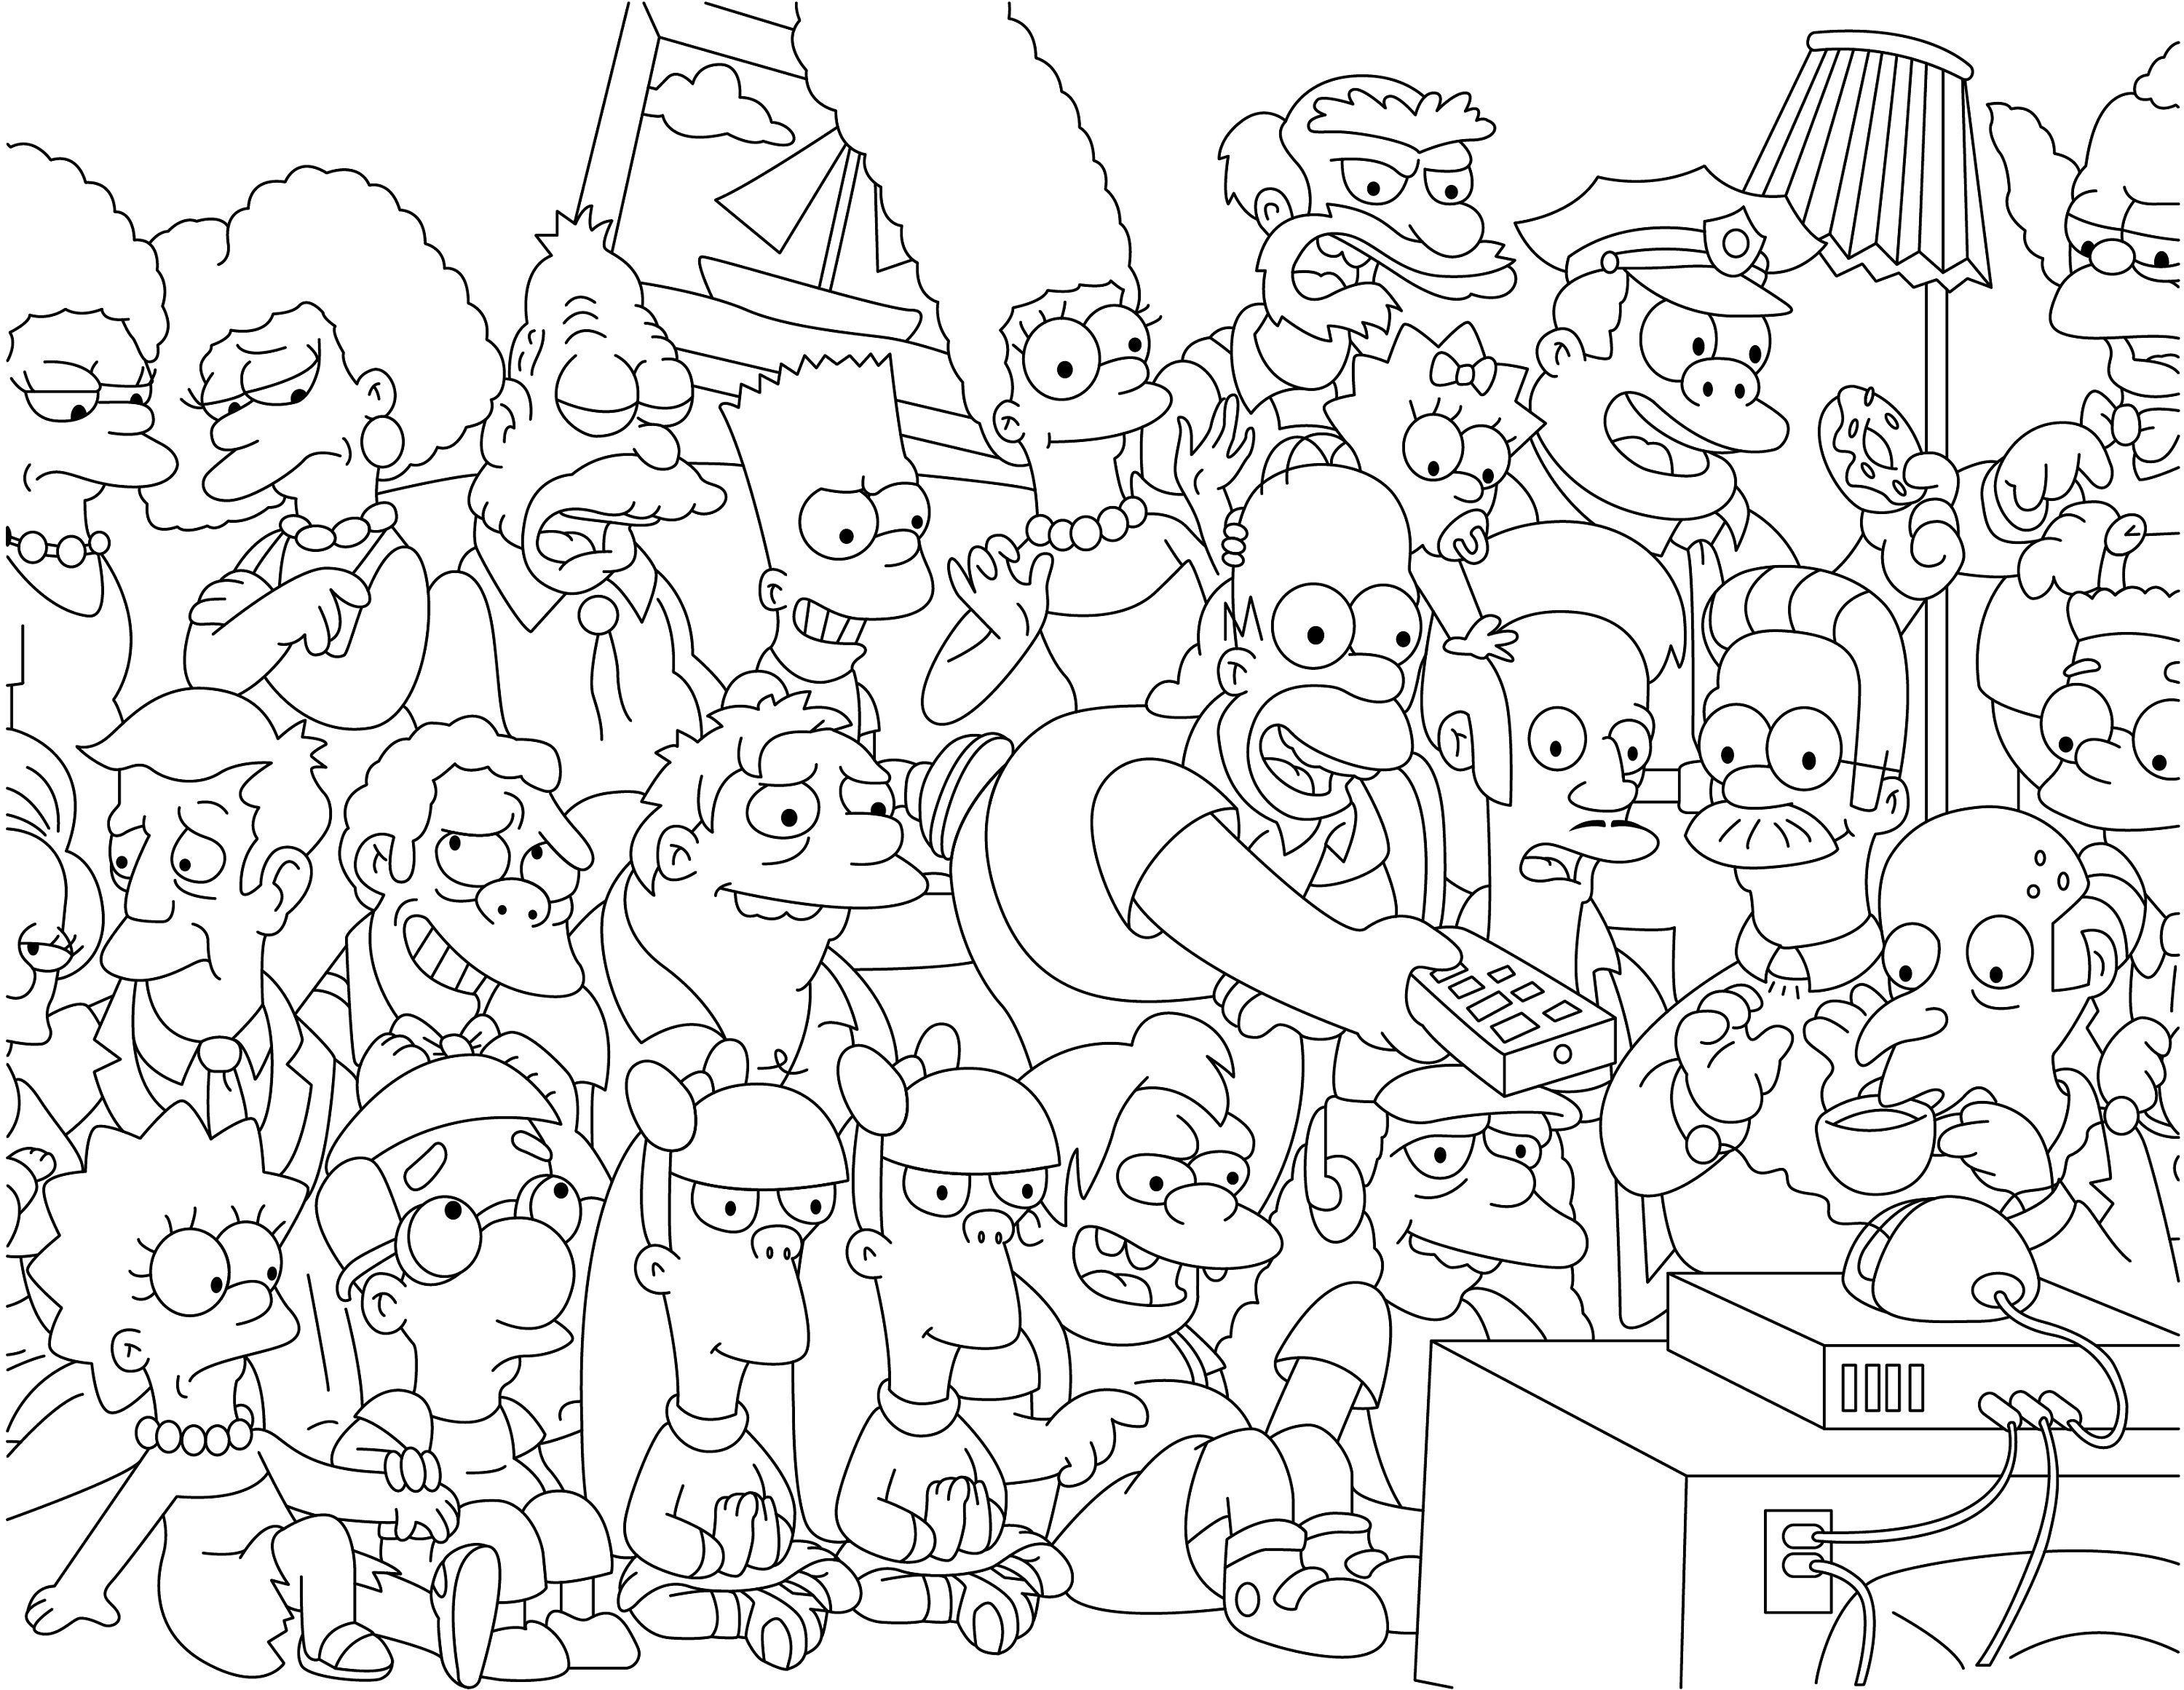 Simpsons coloring